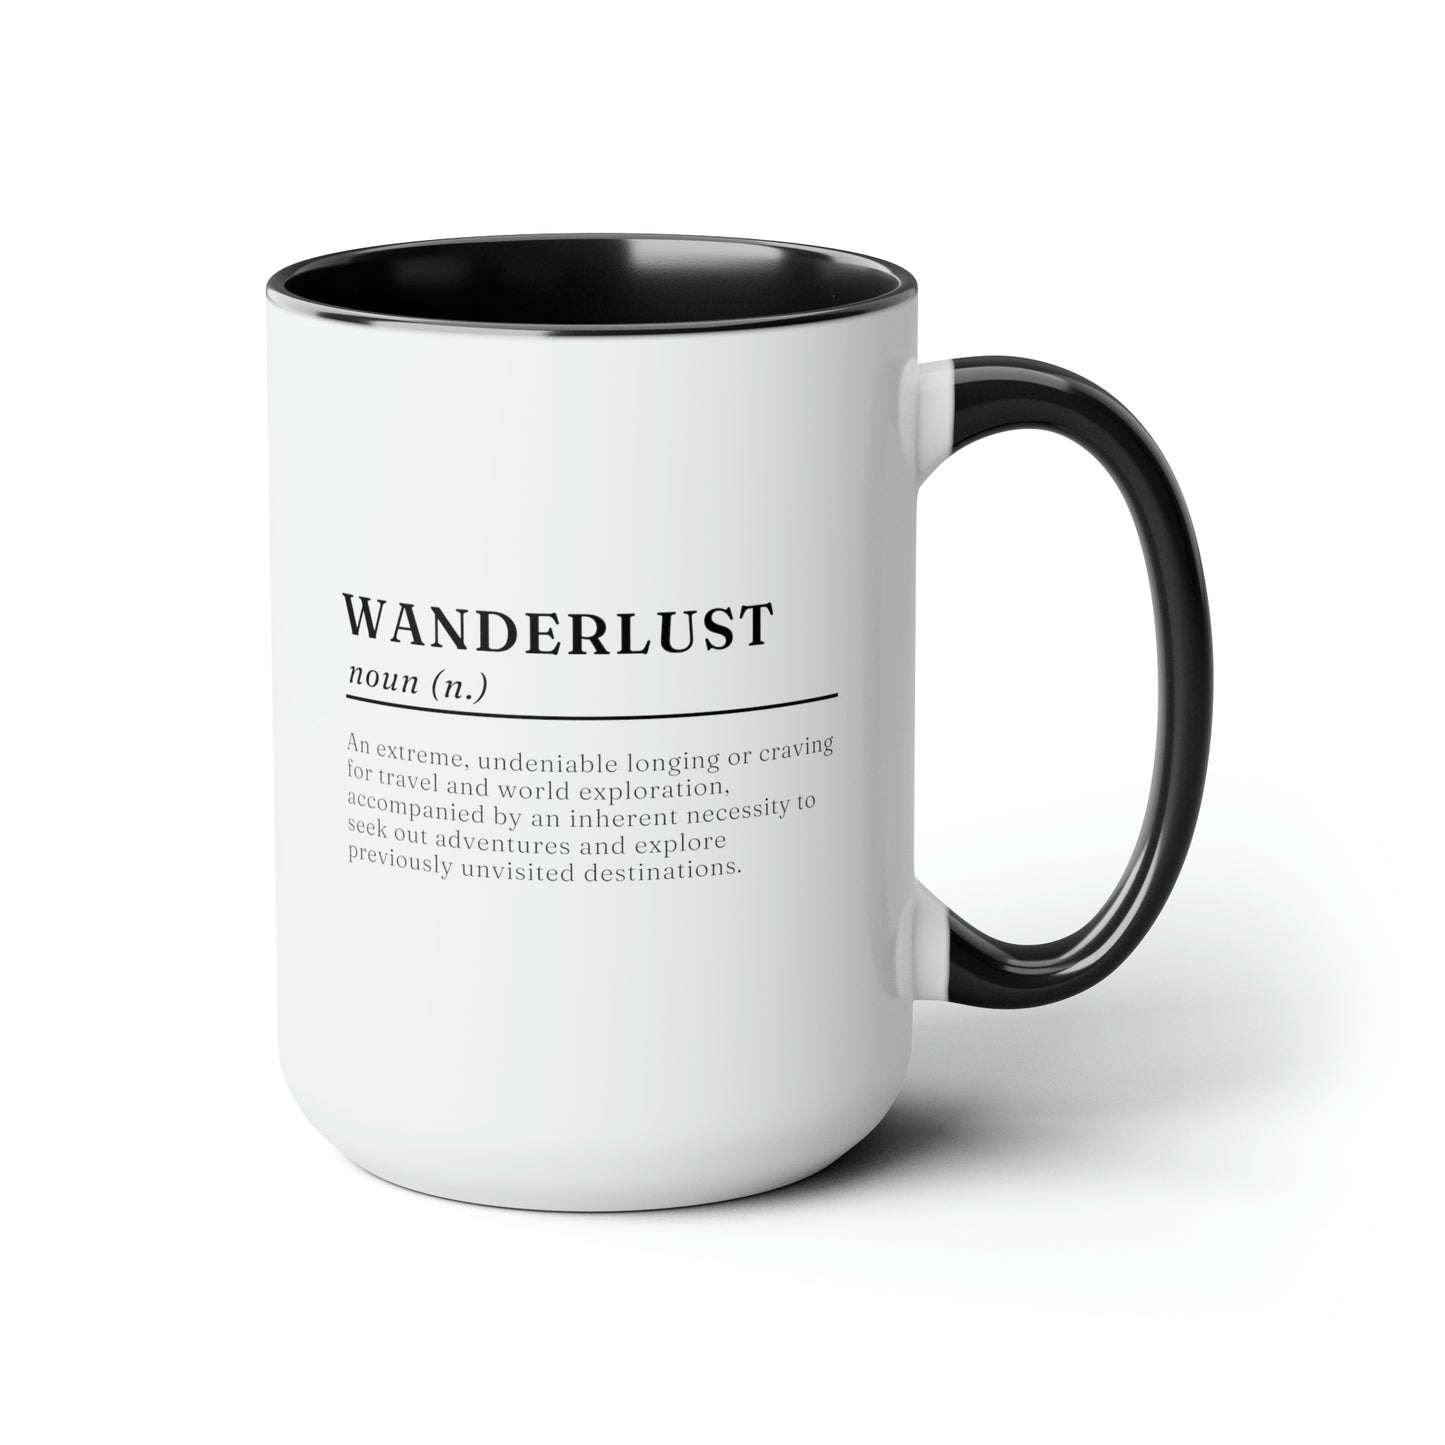 Wanderlust Definition 15oz white with black accent funny large coffee mug gift for traveler backpacker outdoors quote minimalist adventure waveywares wavey wares wavywares wavy wares